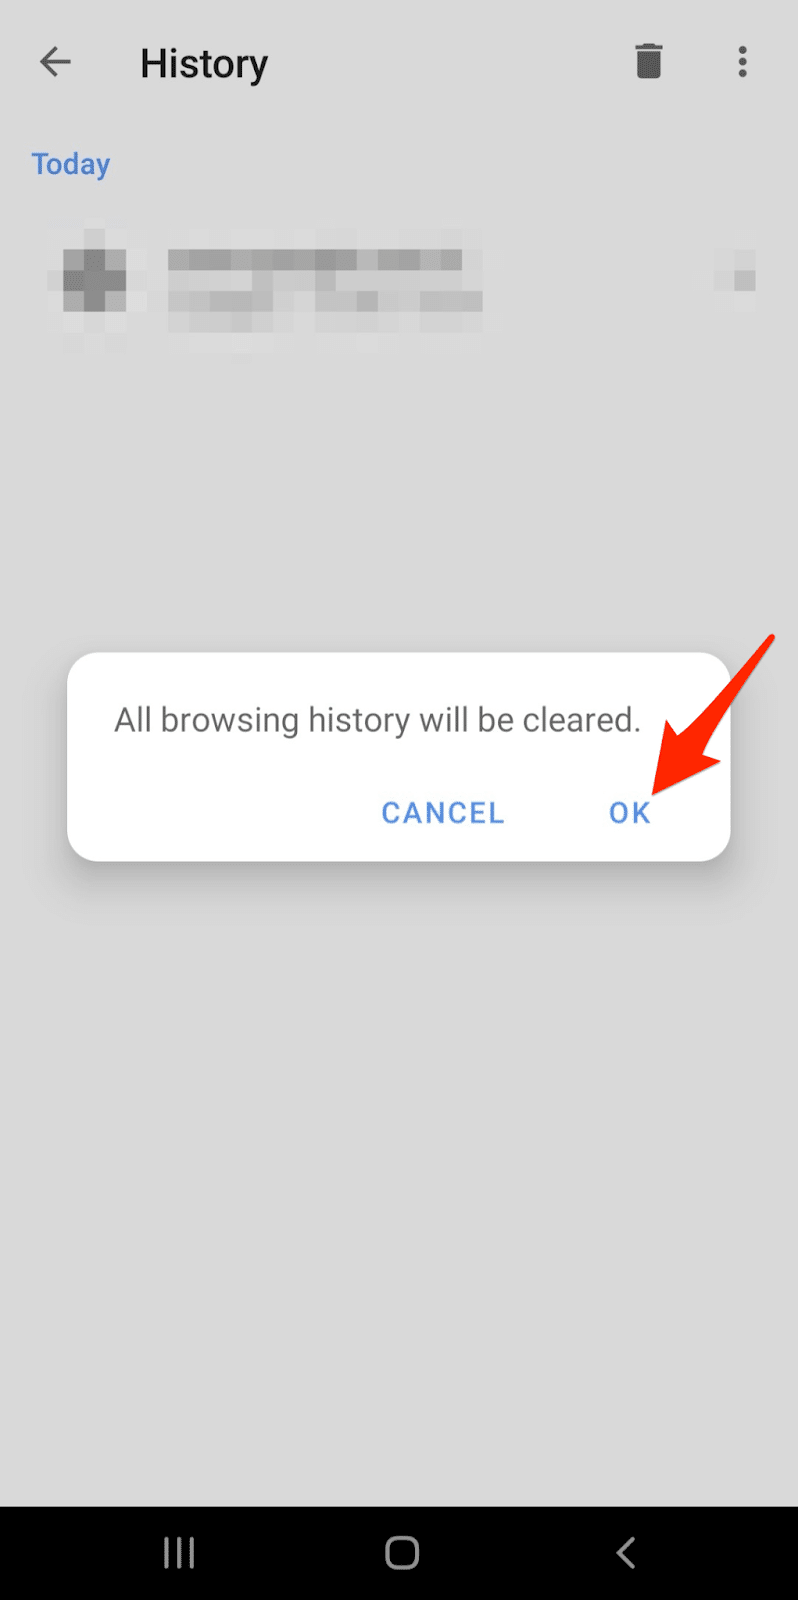 Tap the "OK" button to remove all browsing history